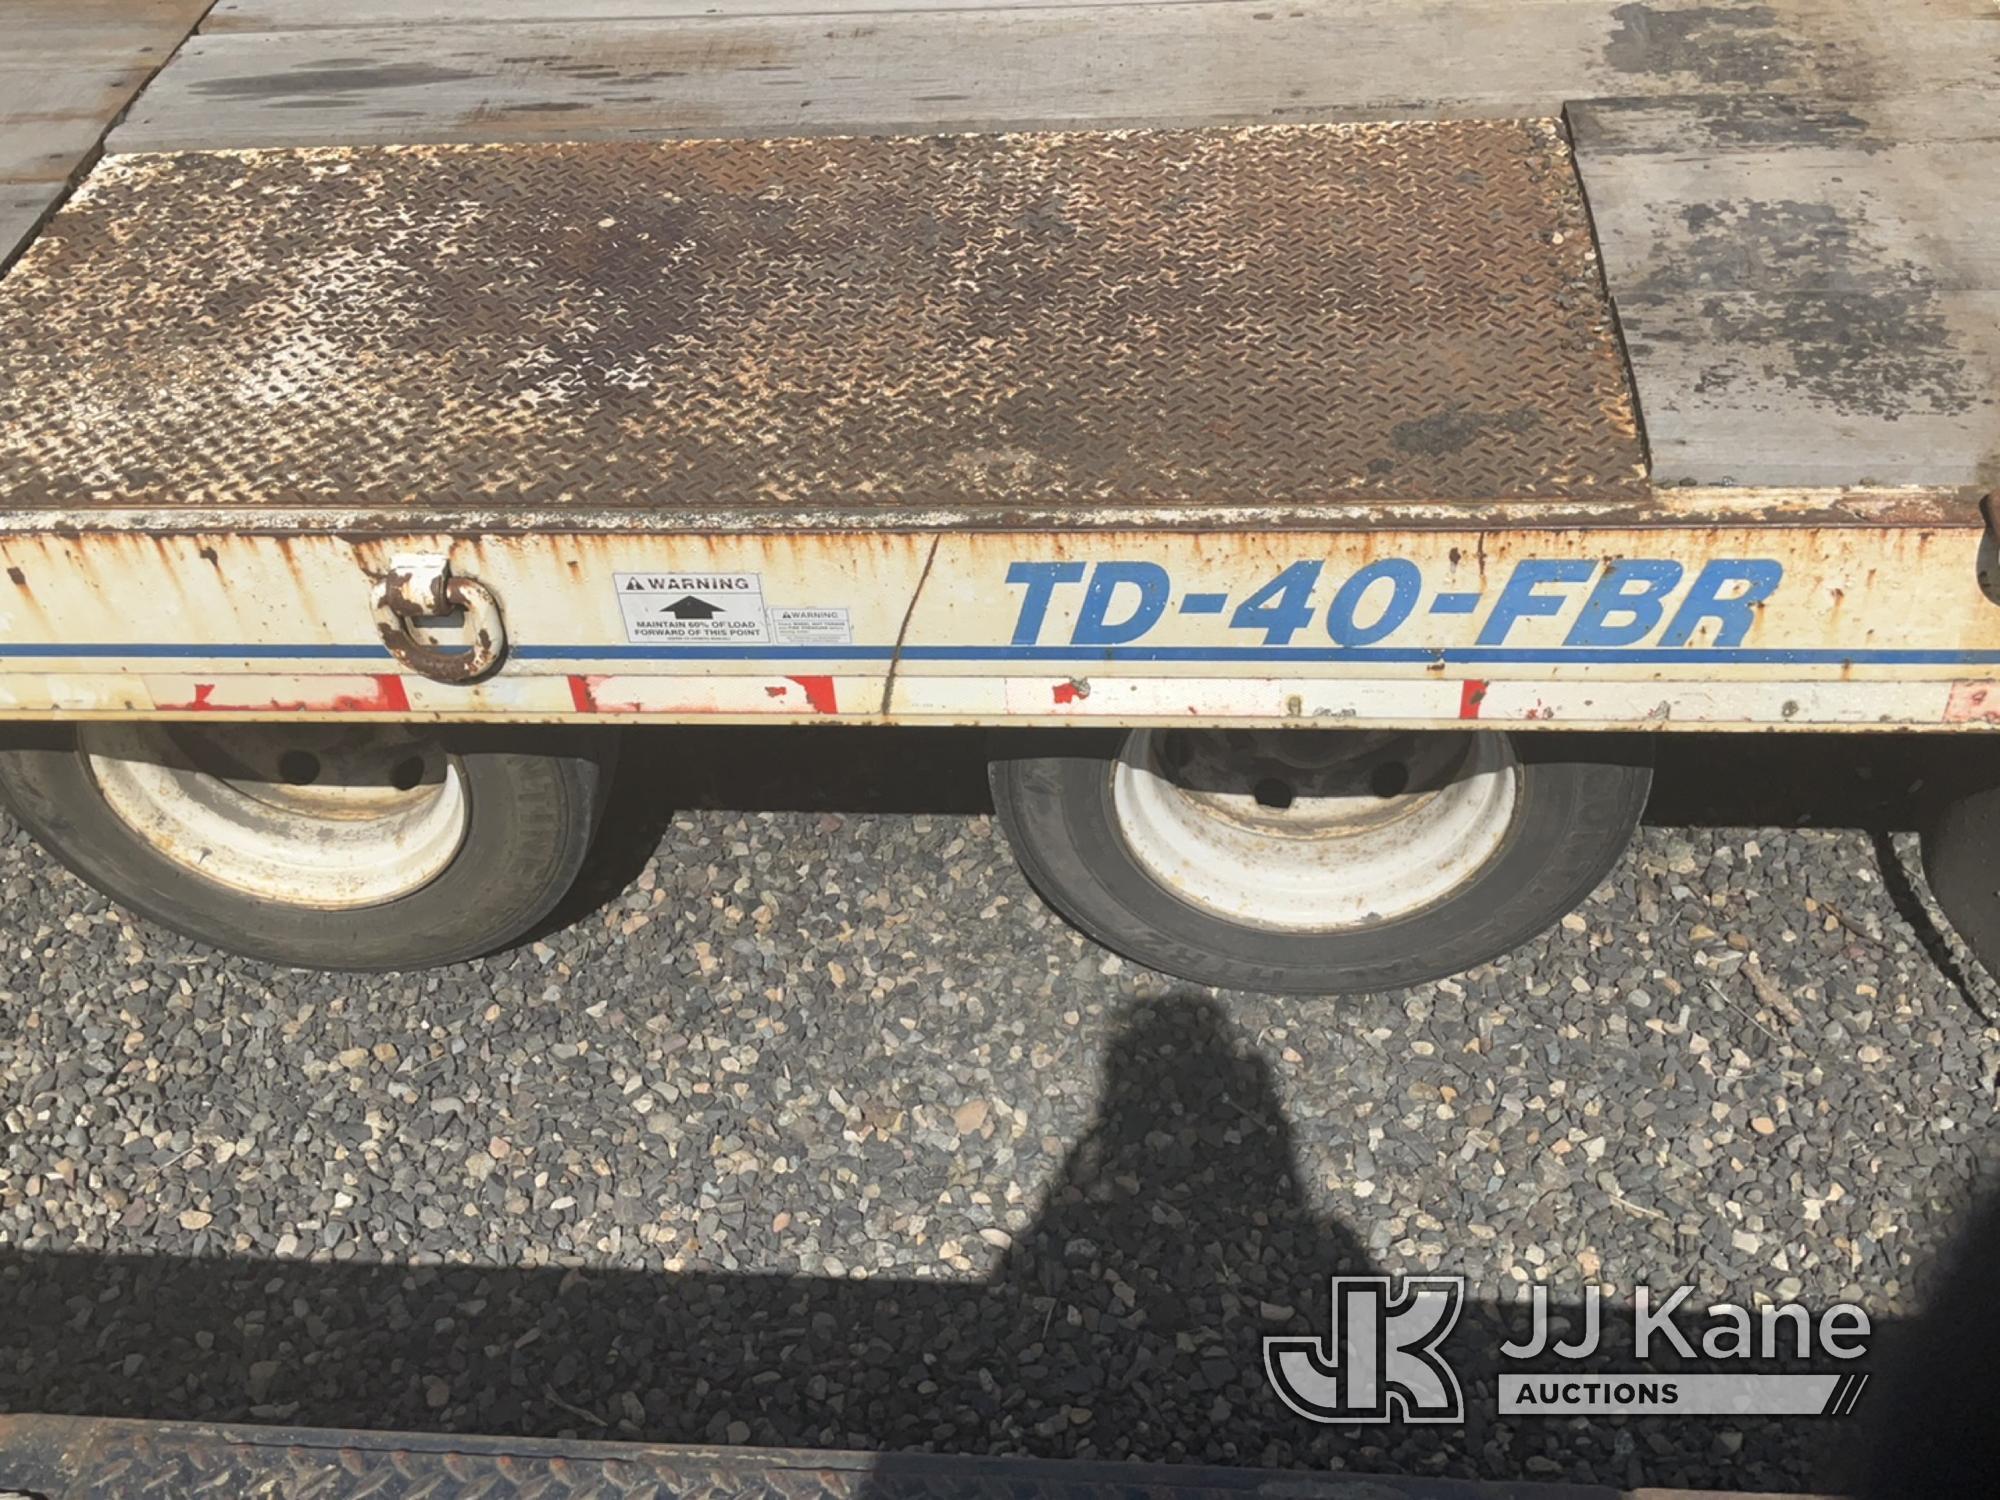 (Portland, OR) 2002 Trailermax TD 40 FBR T/A Tagalong Equipment Trailer Towable